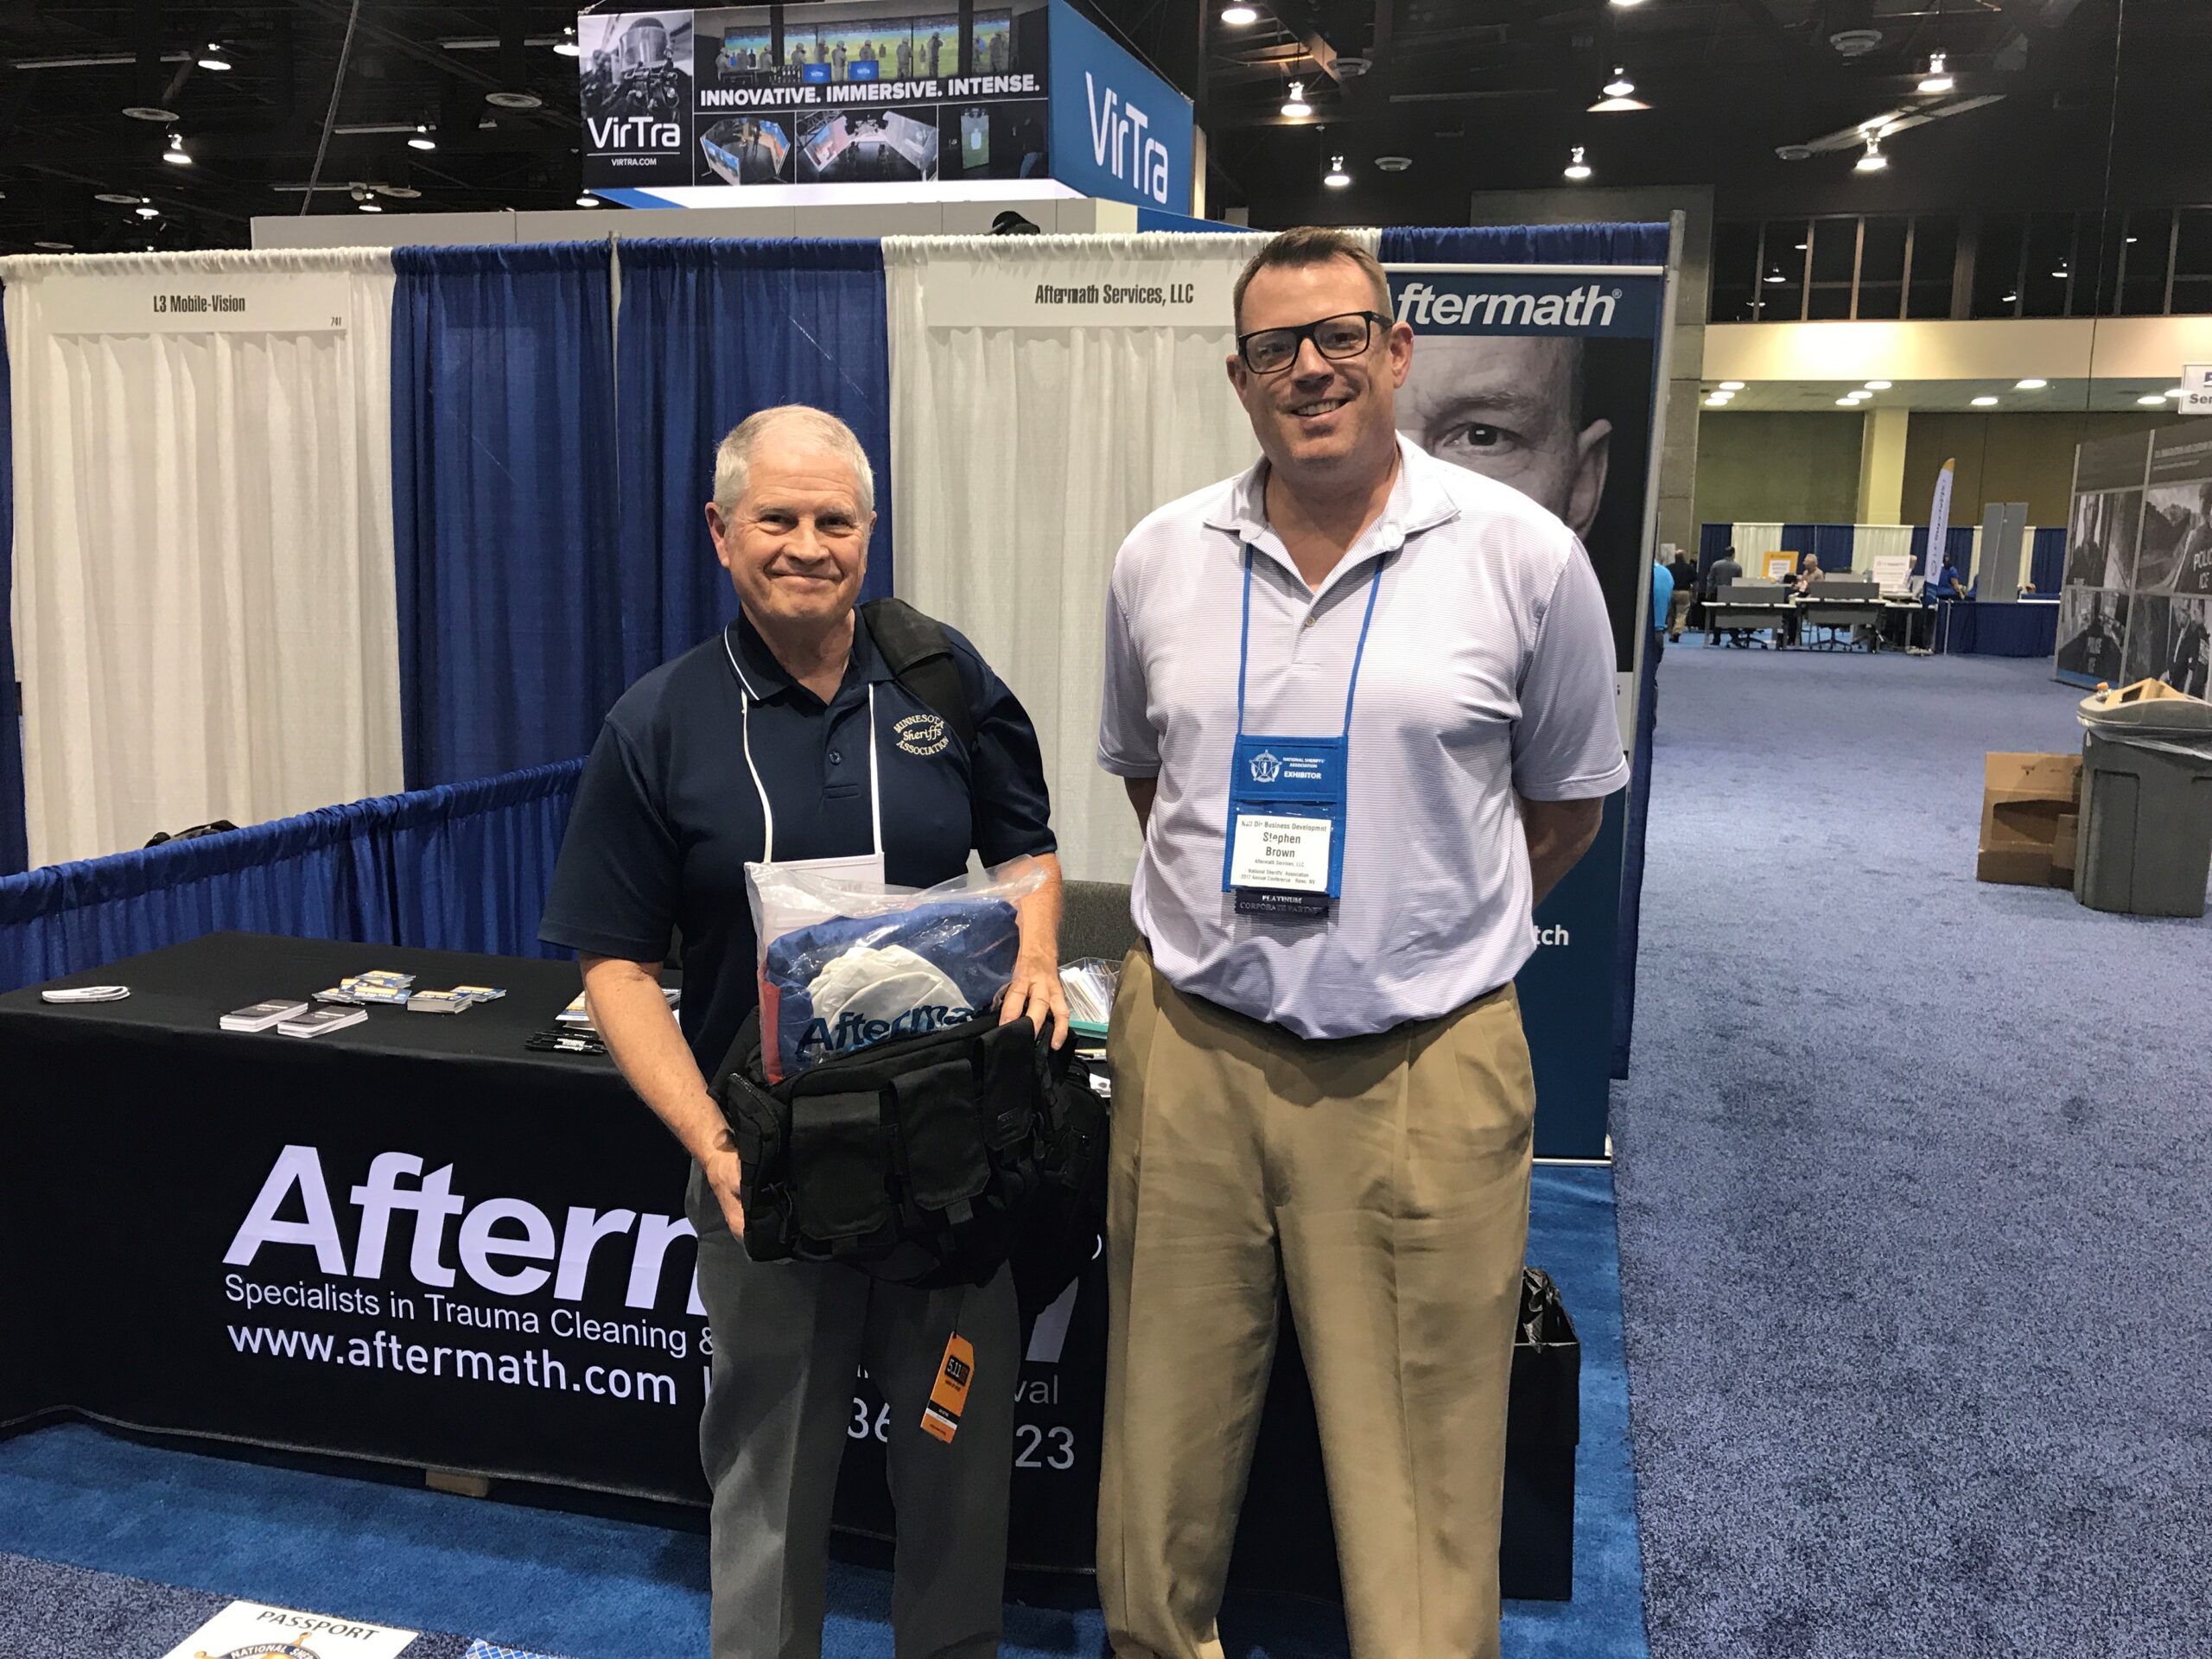 Aftermath booth at 2017 National Sheriff's Assoc. Conference in Reno.